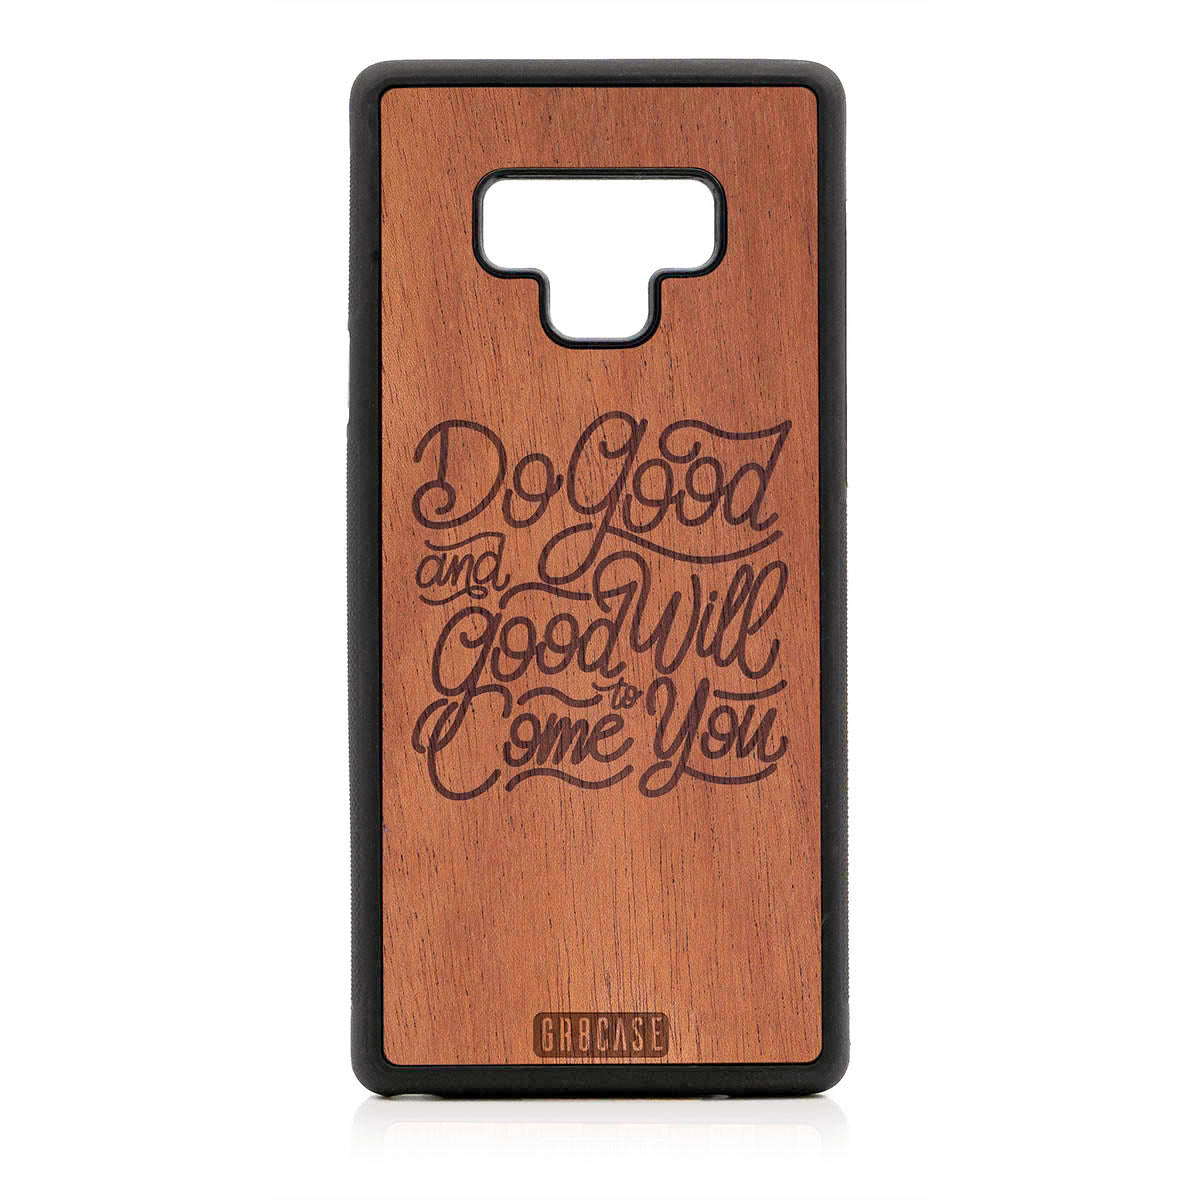 Do Good And Good Will Come To You Design Wood Case For Samsung Galaxy Note 9 by GR8CASE